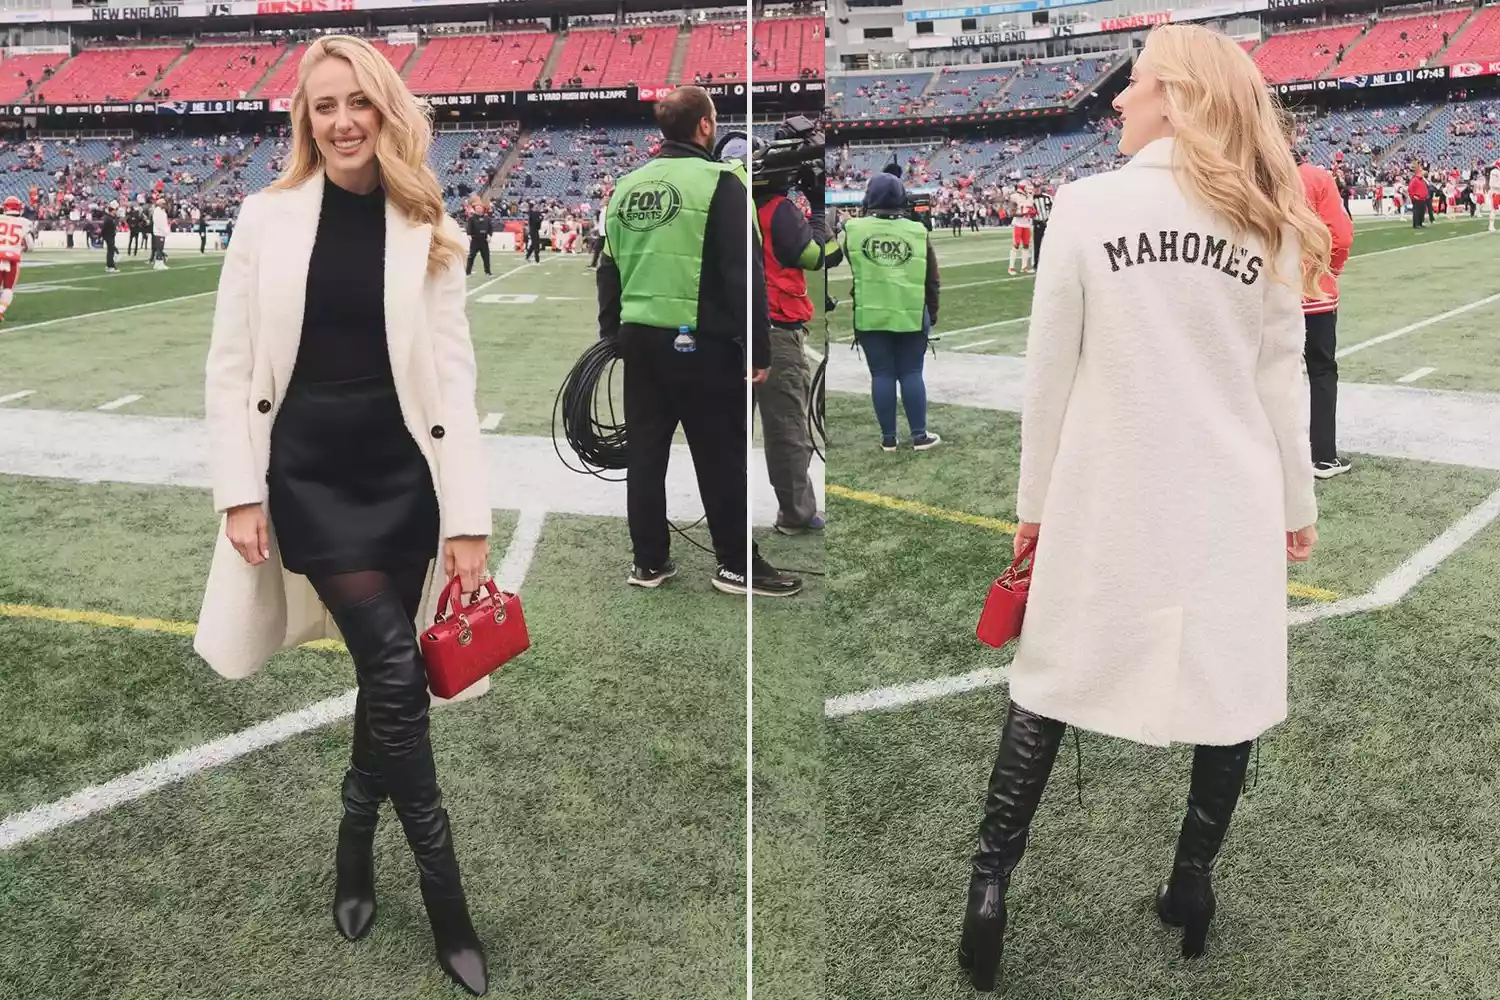 Brittany Mahomes Game Day Style